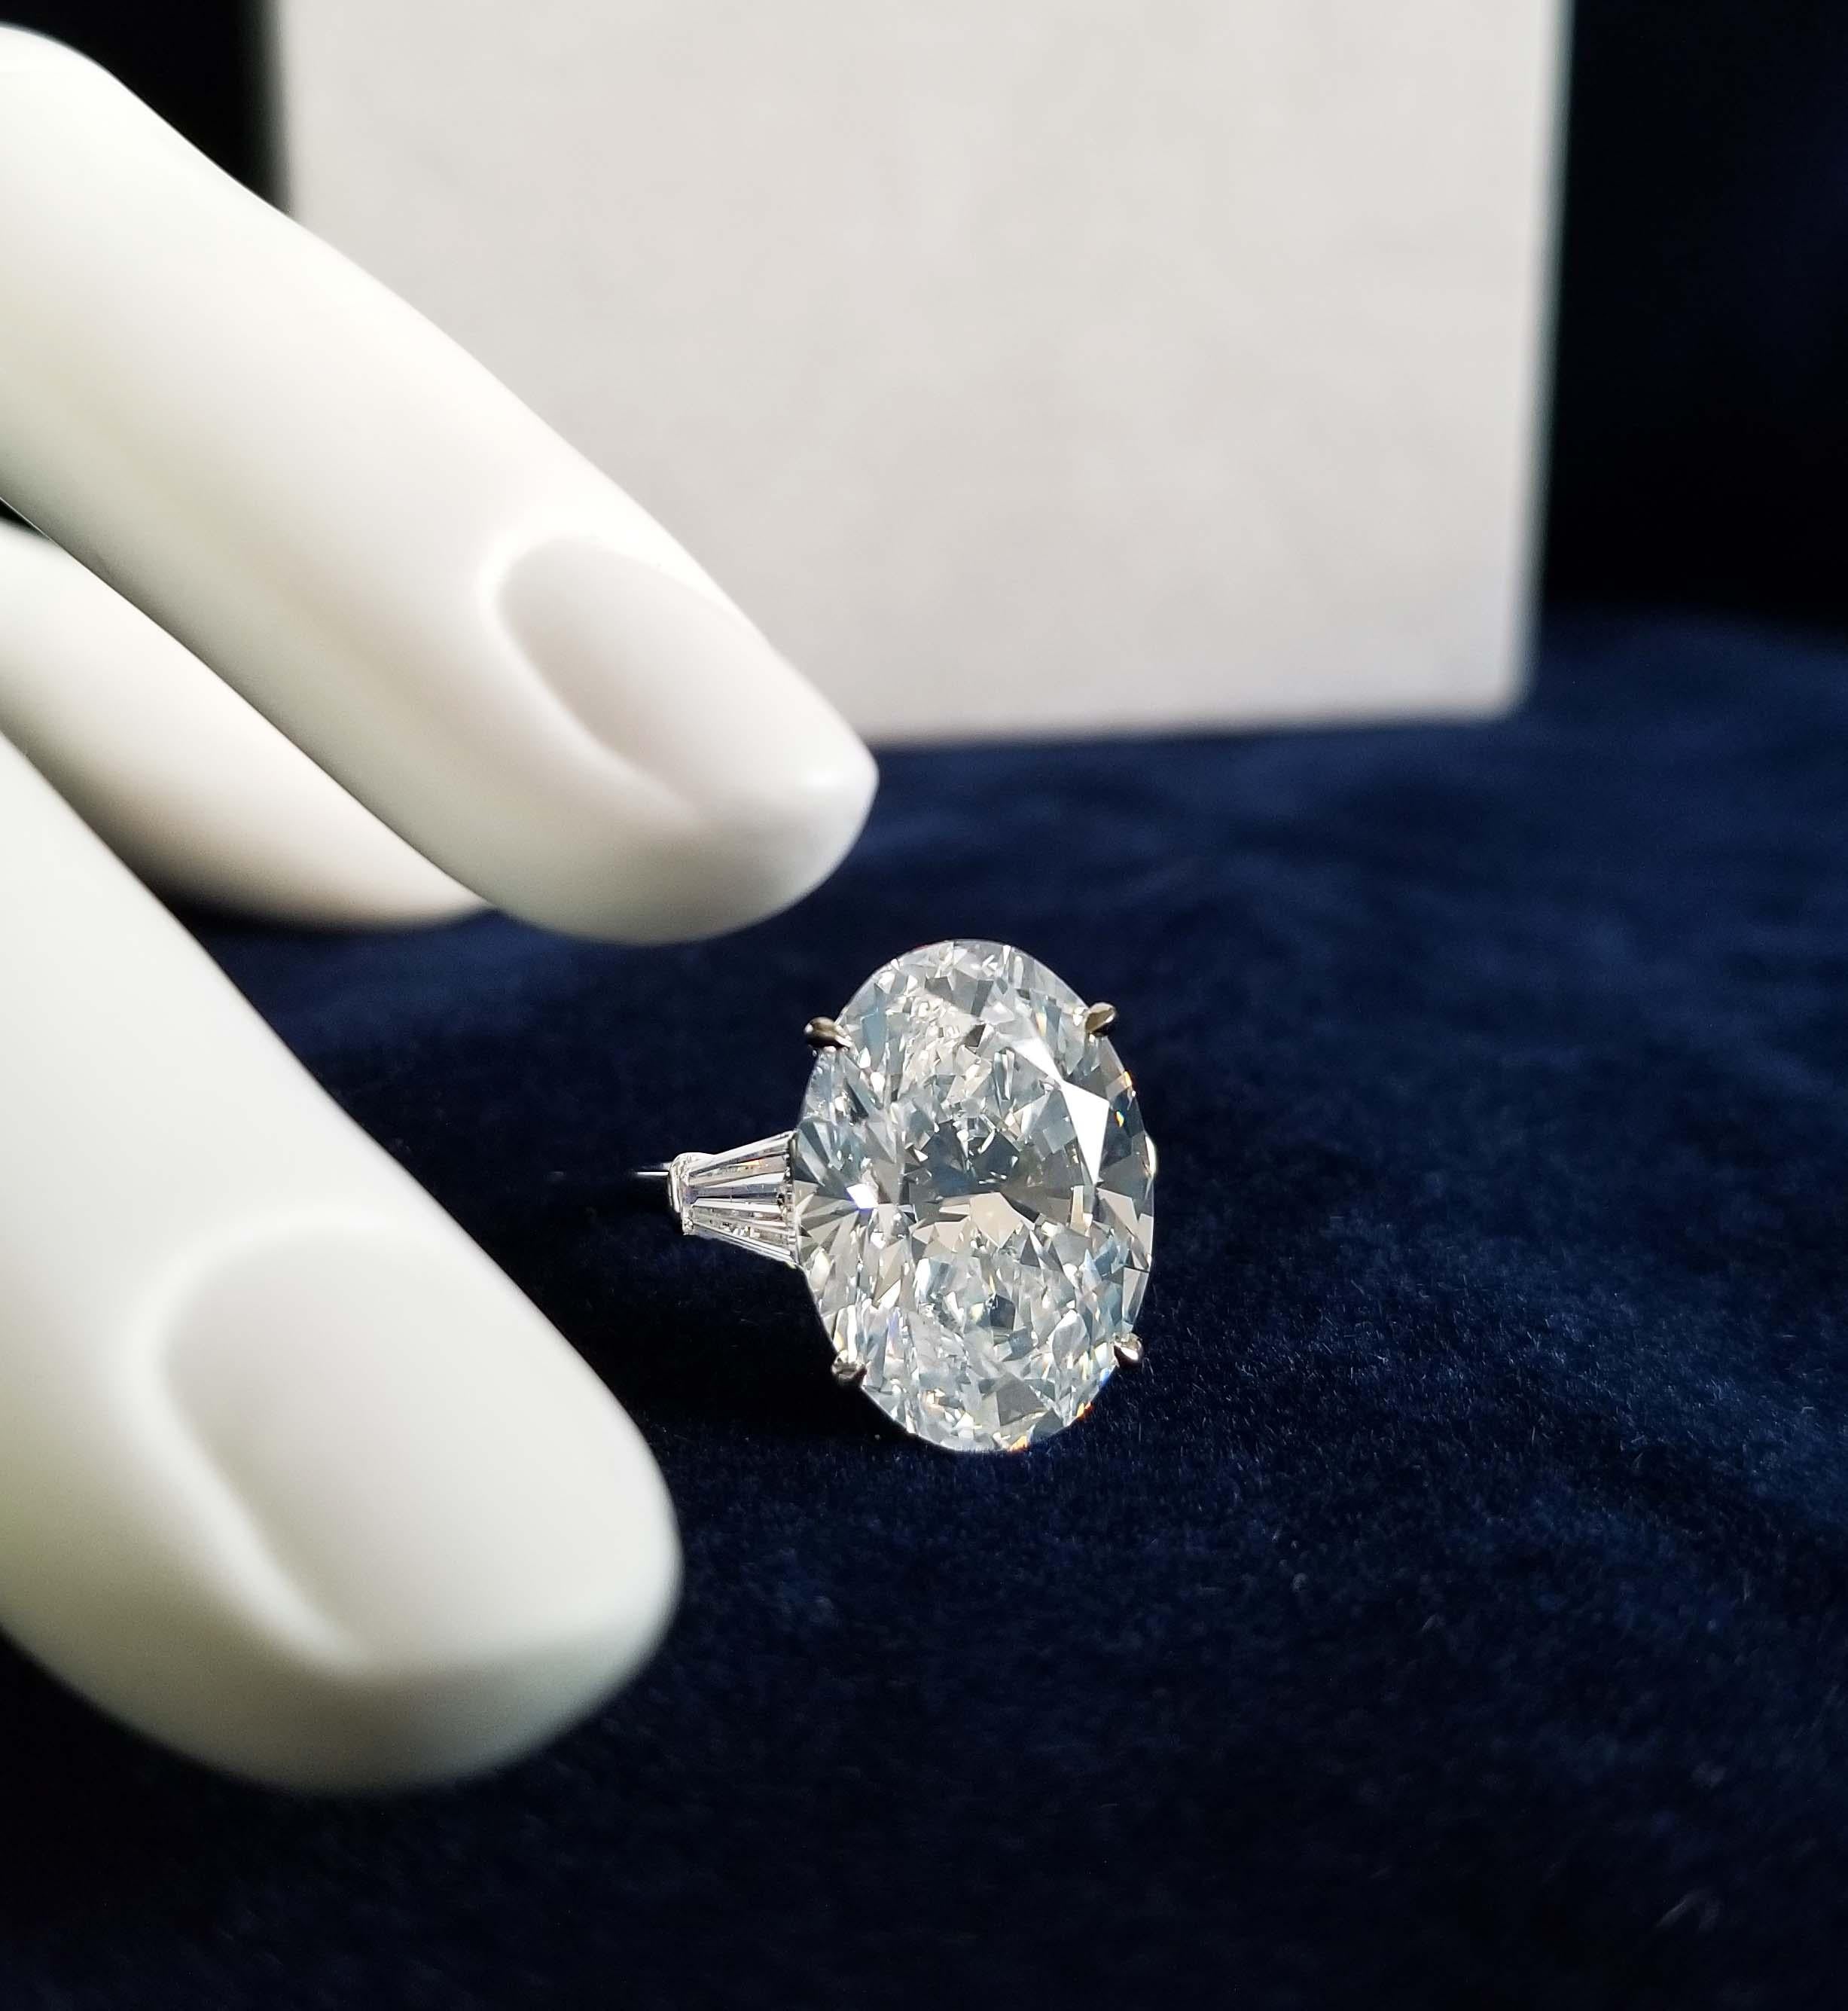 This 11 carat Oval Cut Diamond has been set in a Classic Platinum Solitaire Ring enhancing the beauty of the Scarselli's Diamond (see GIA certificate picture for detailed stone information). The ring sets the diamond beautifully with a pair of side